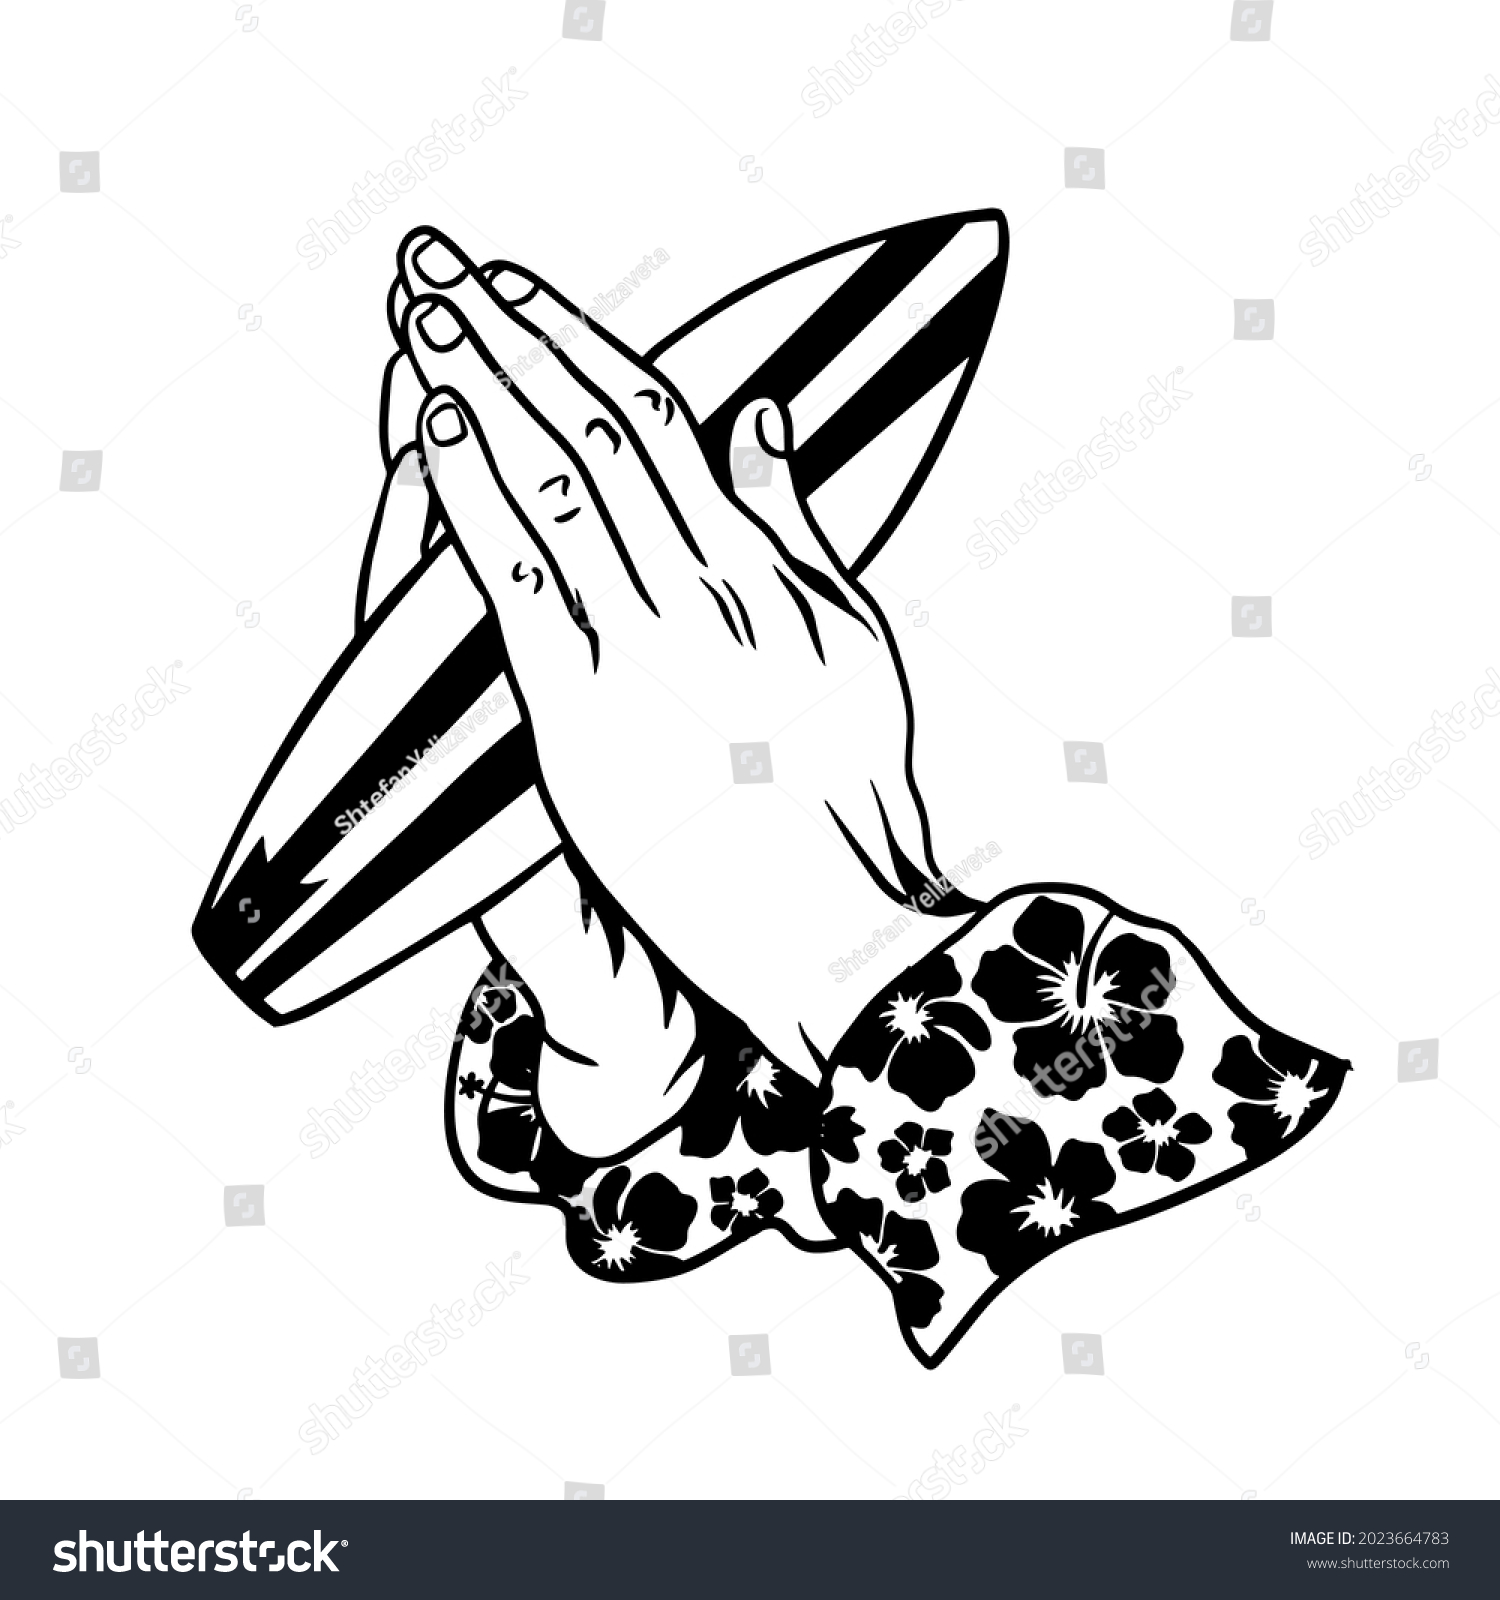 SVG of Clipart illustration praying for the waves. Hands of a praying person. He holds a surfboard in his hands. svg